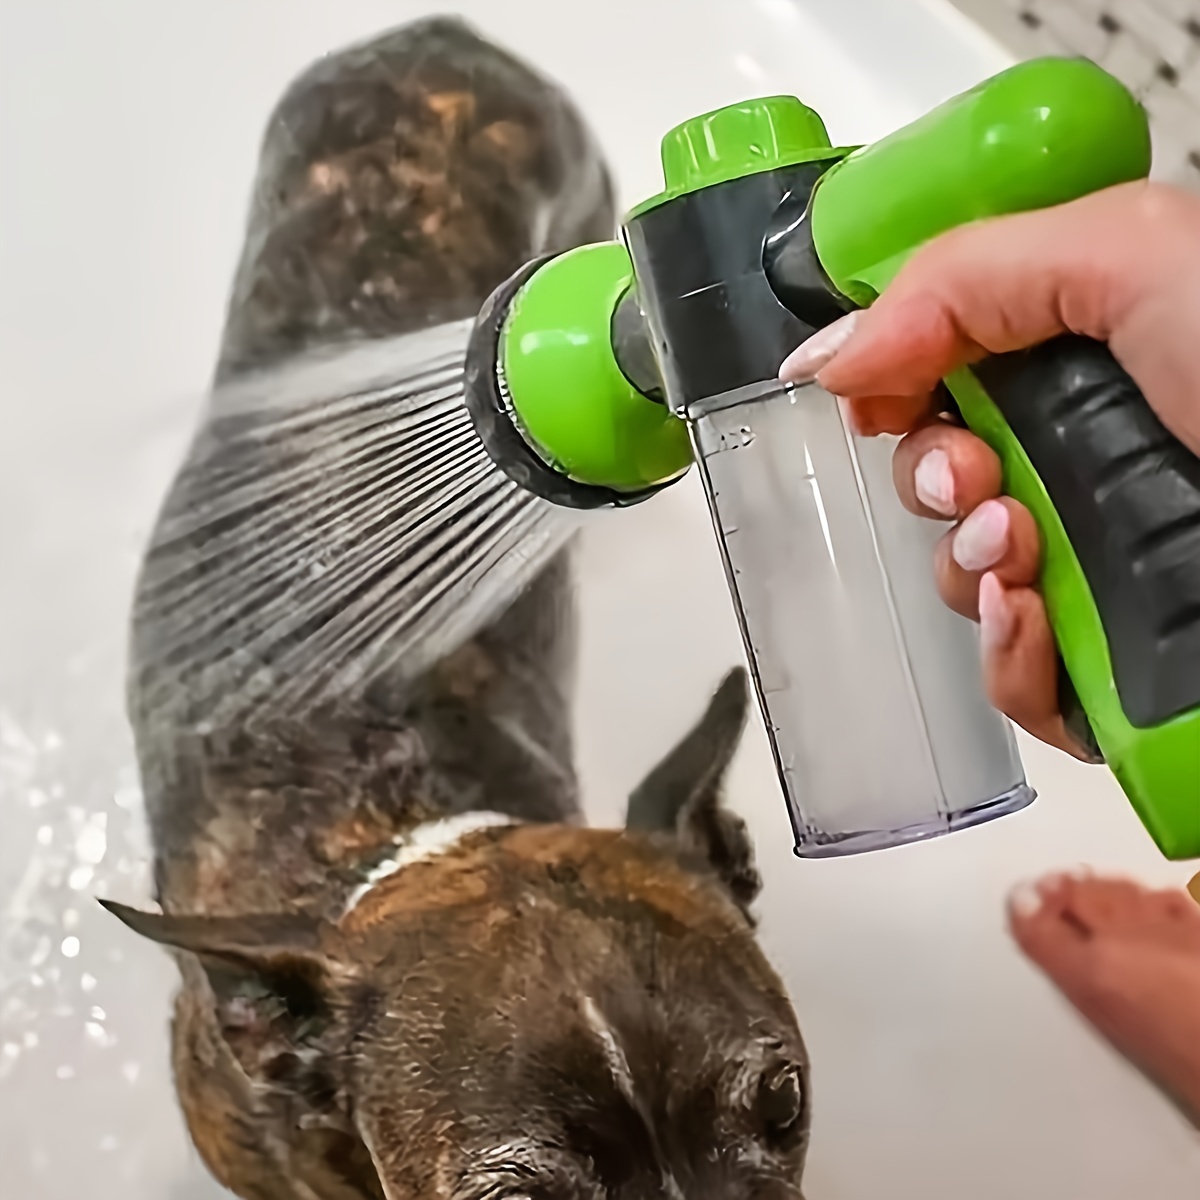 

5-piece Dog Wash & Garden Hose Nozzle Set - Versatile Pet Bathing Tool For Easy Cleaning, Watering Plants & Car Washing